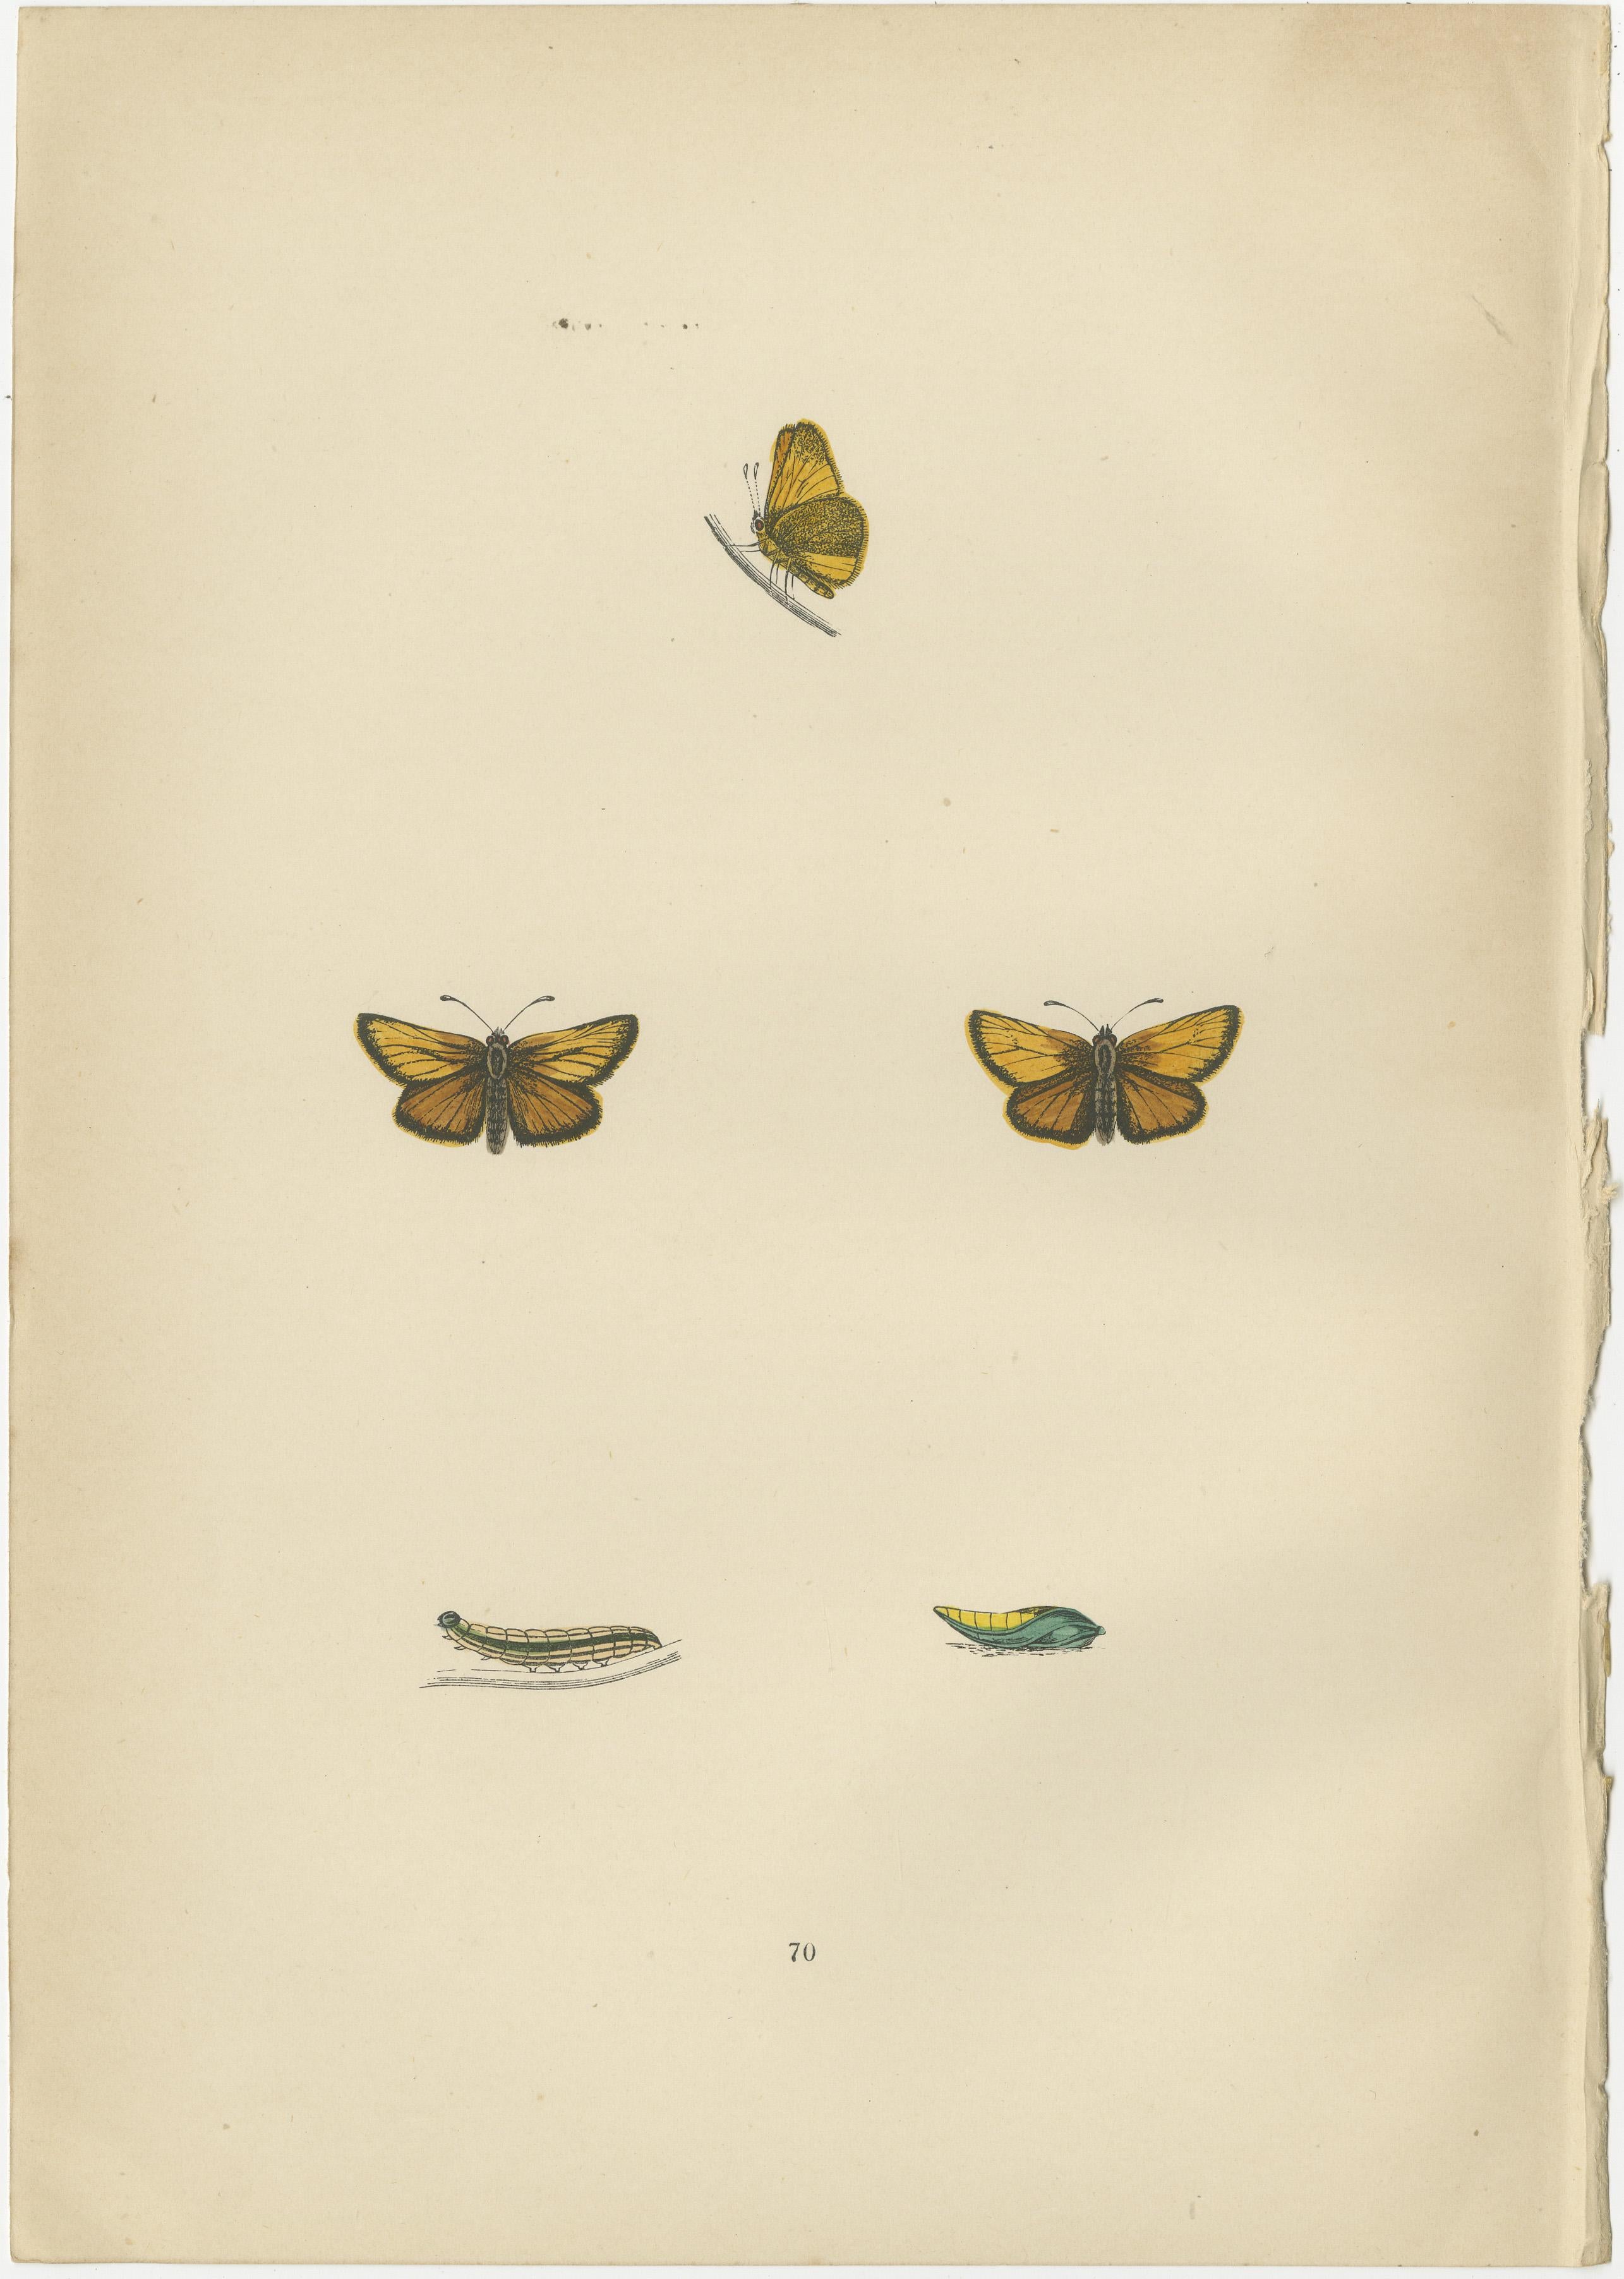 The butterflies featured in the plates from 